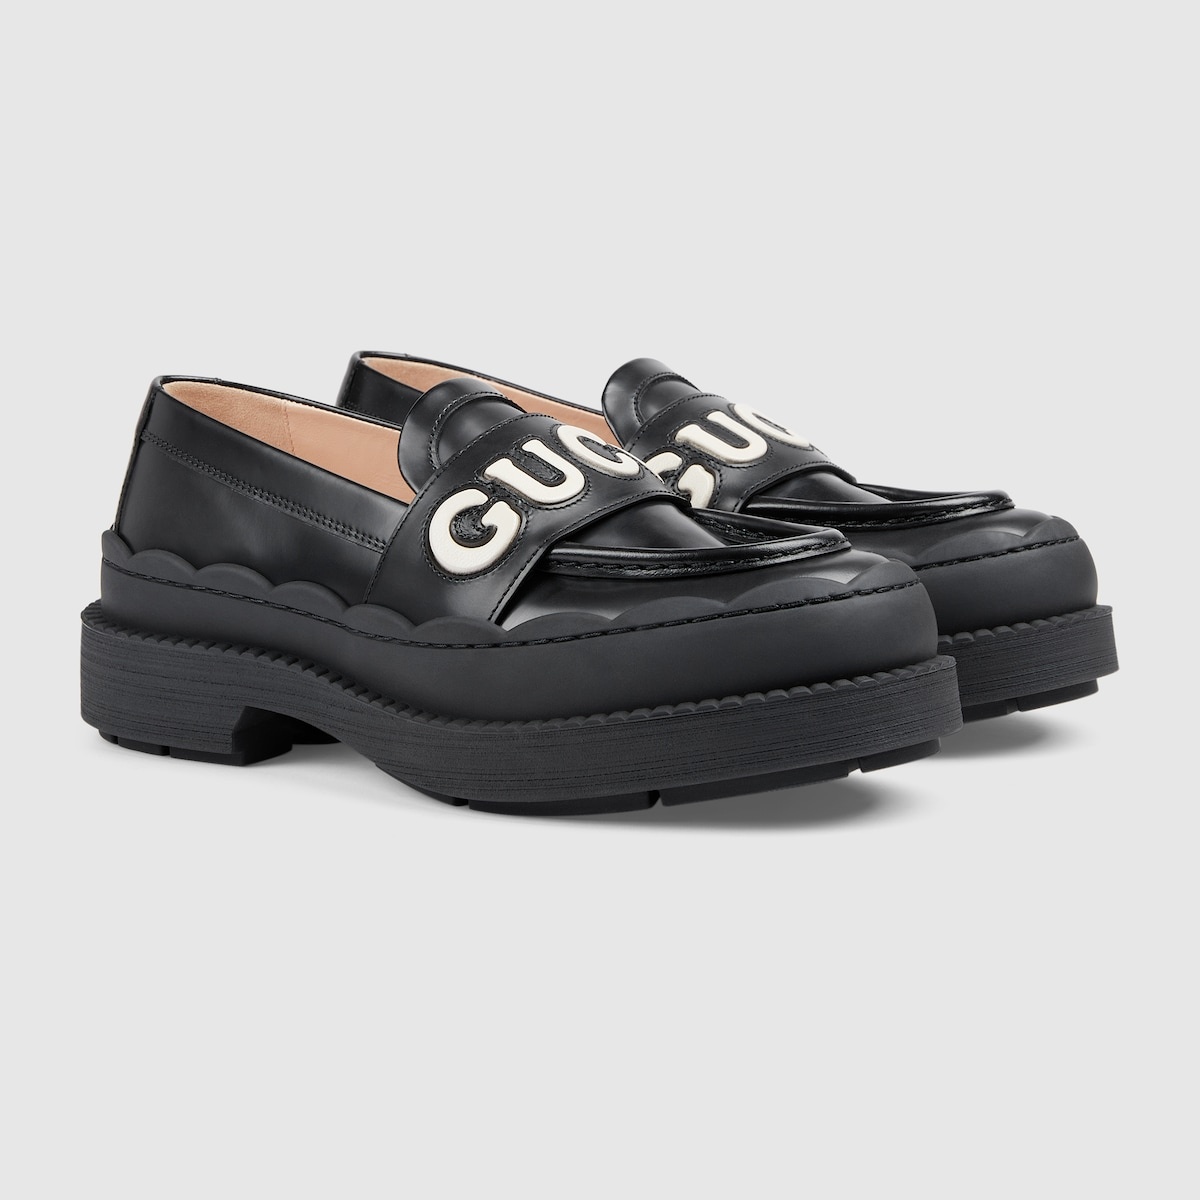 Women's Gucci loafer - 2